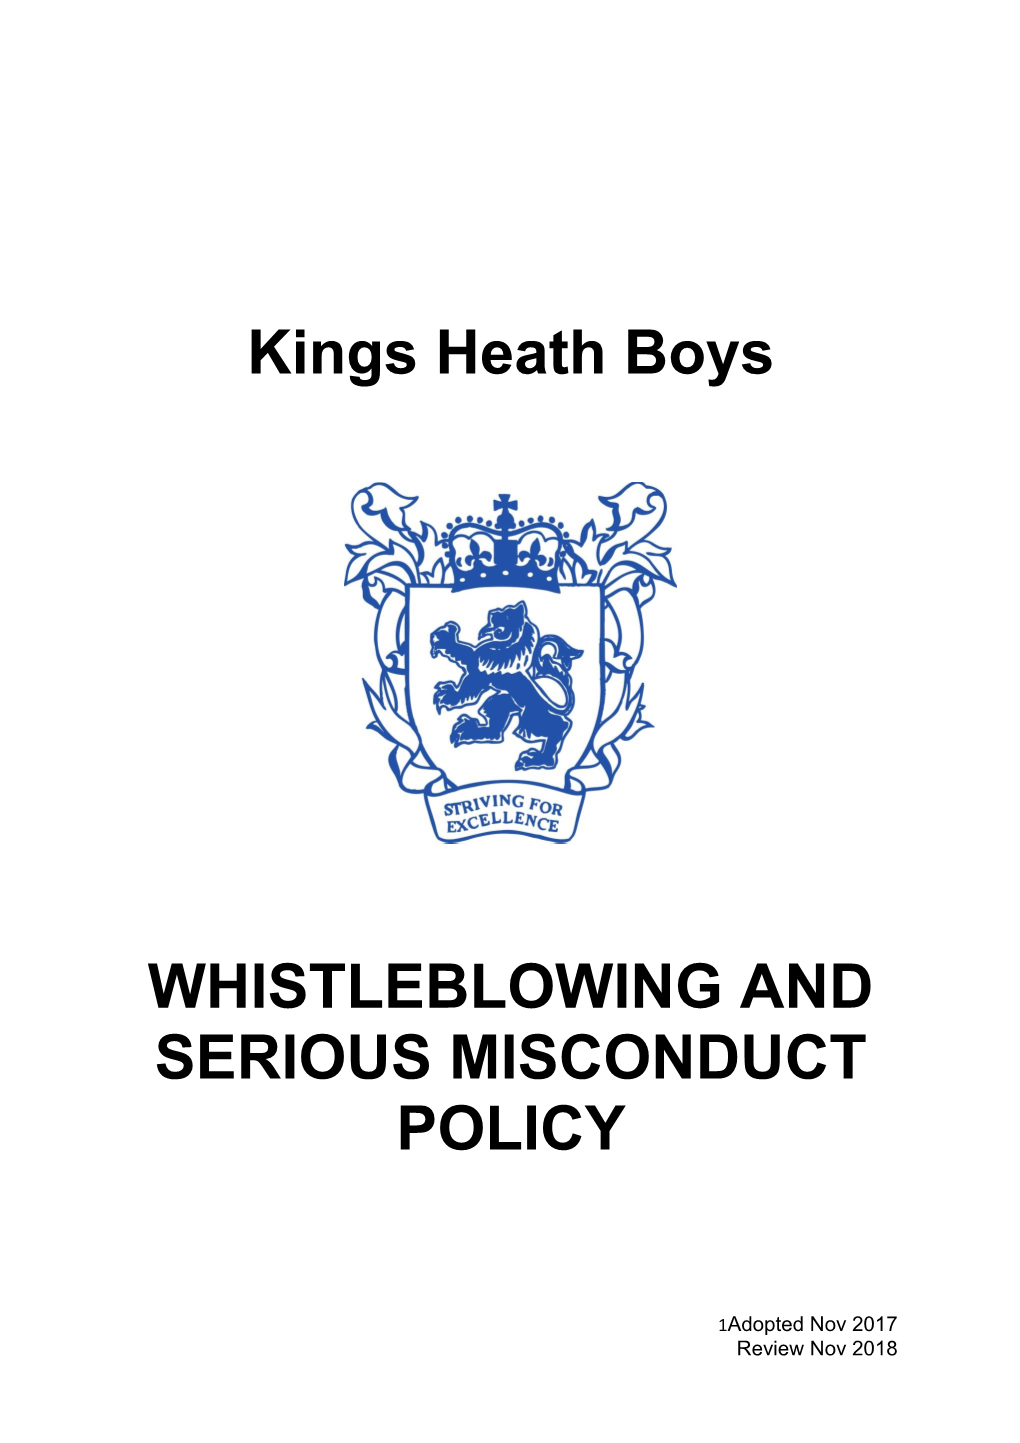 Whistleblowing and Serious Misconduct Policy